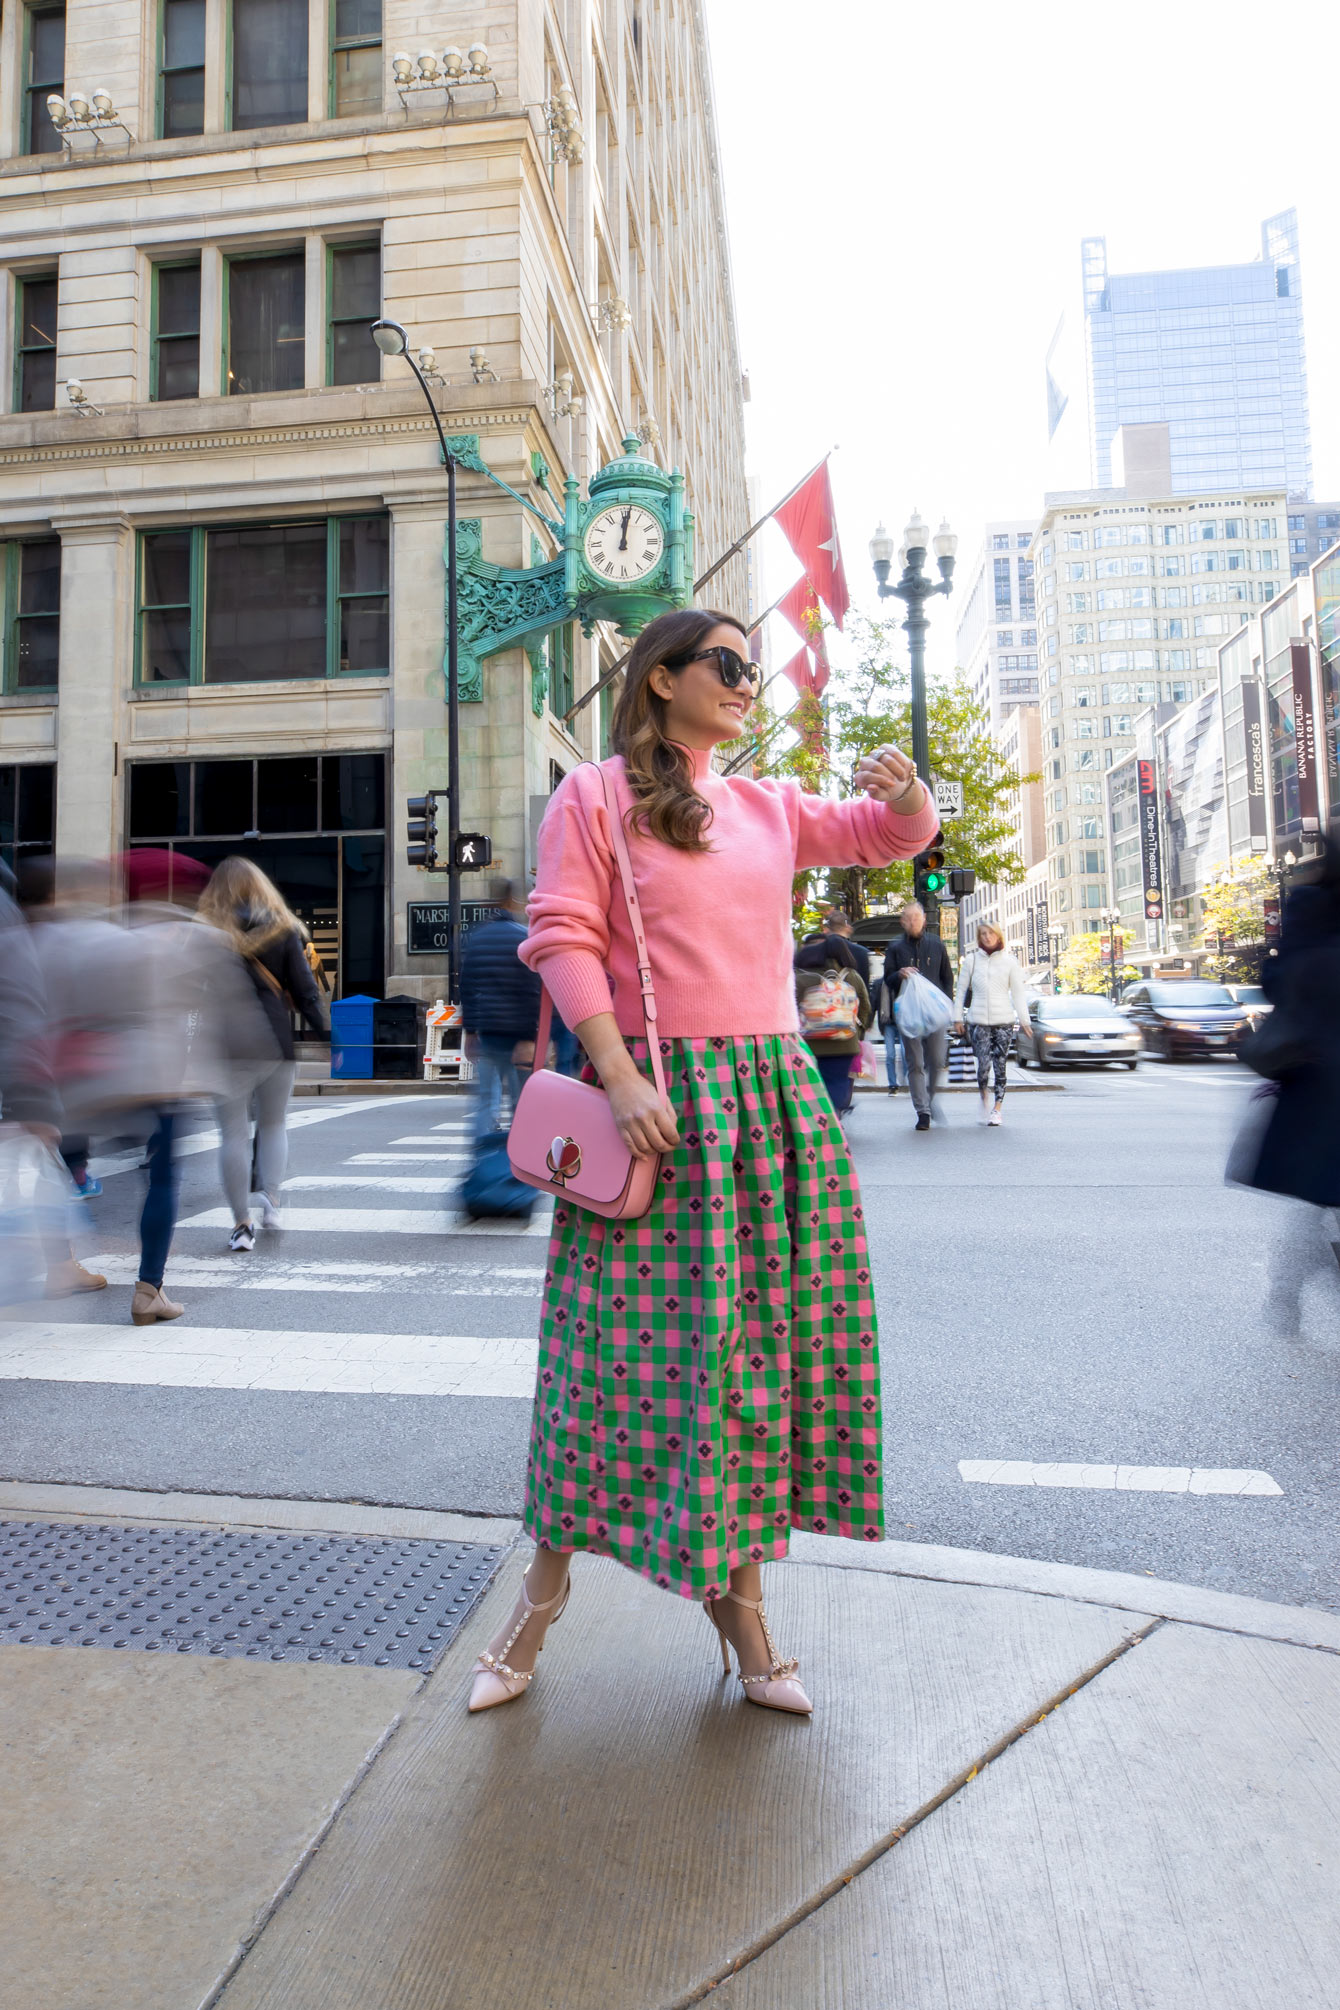 Kate Spade's Last Collection - The New York Times